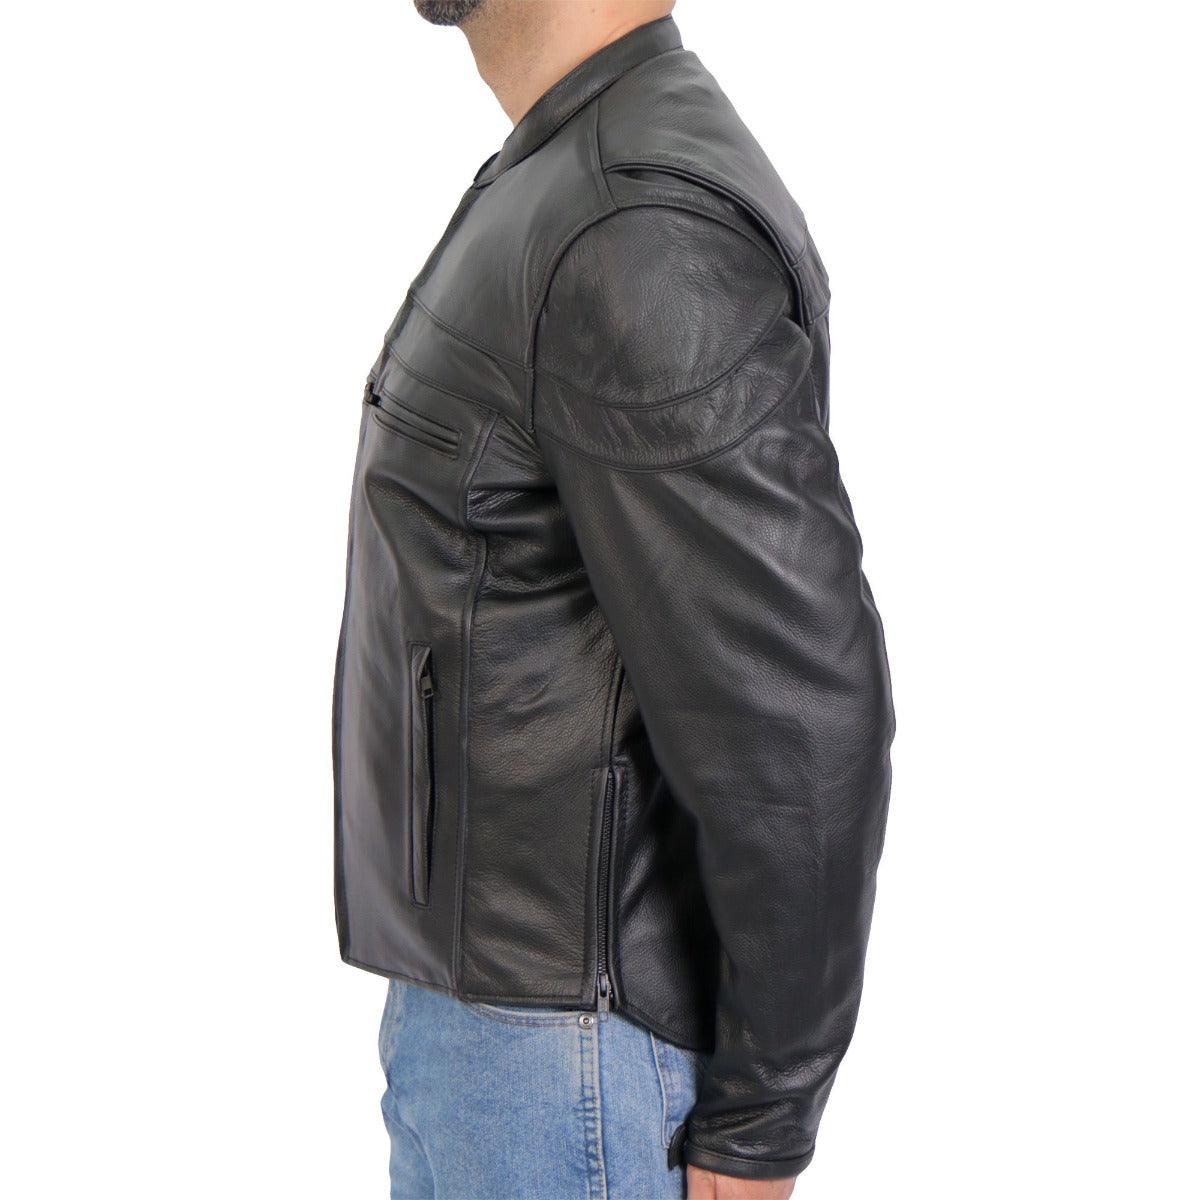 Hot Leathers Skull Flag Lined Carry Conceal Tall Men's Leather Jacket W/ Double Piping - American Legend Rider